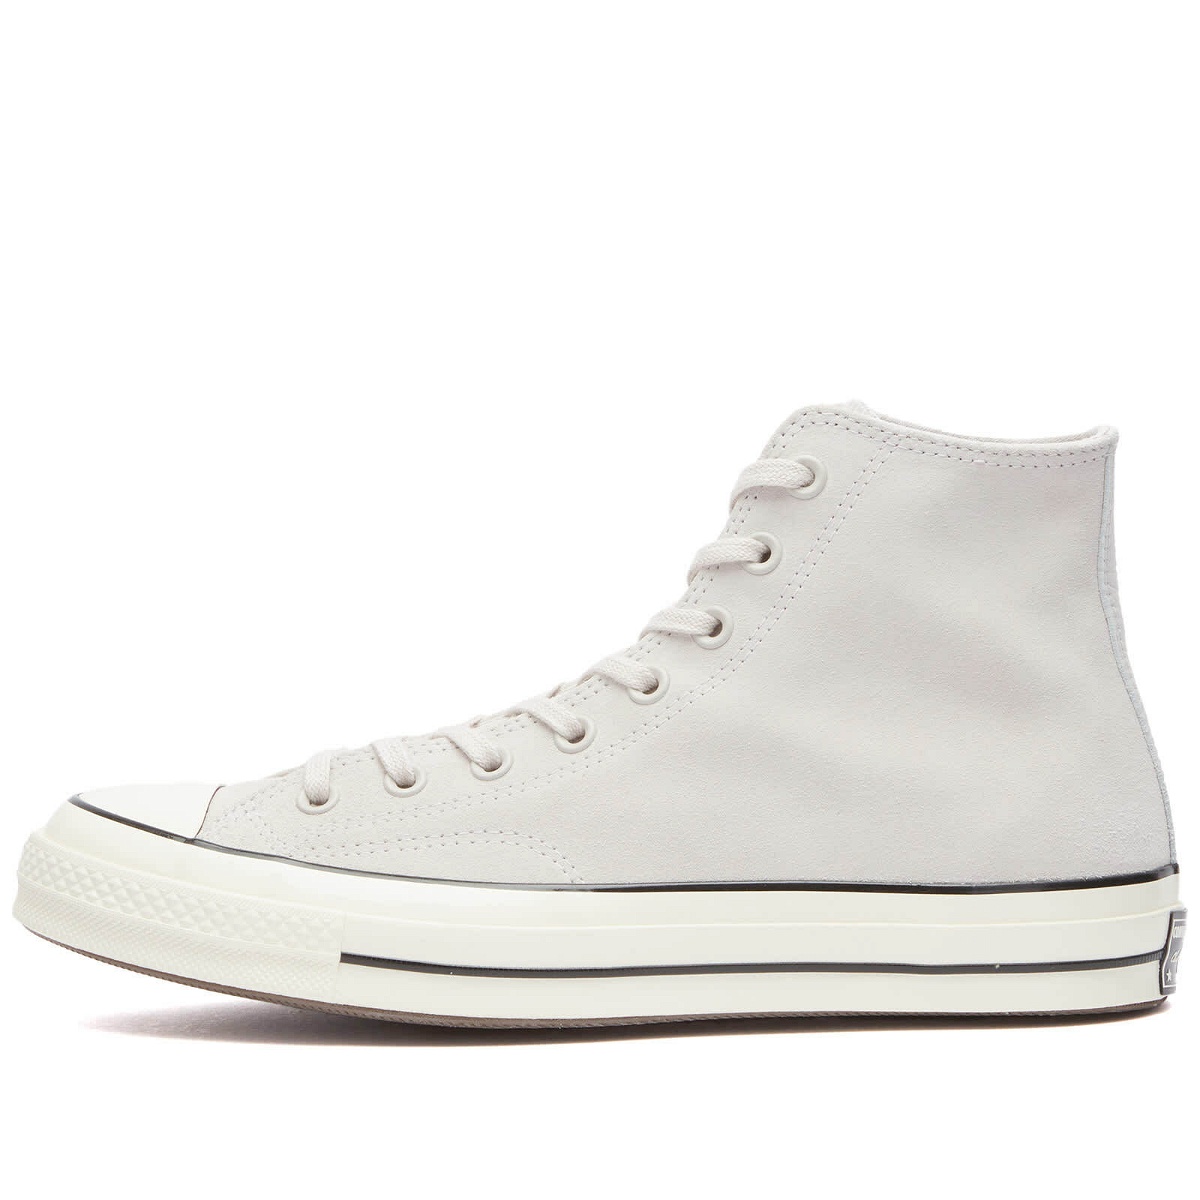 Converse Men's Chuck 70 Seasonal Color Suede Sneakers in Pale Putty ...